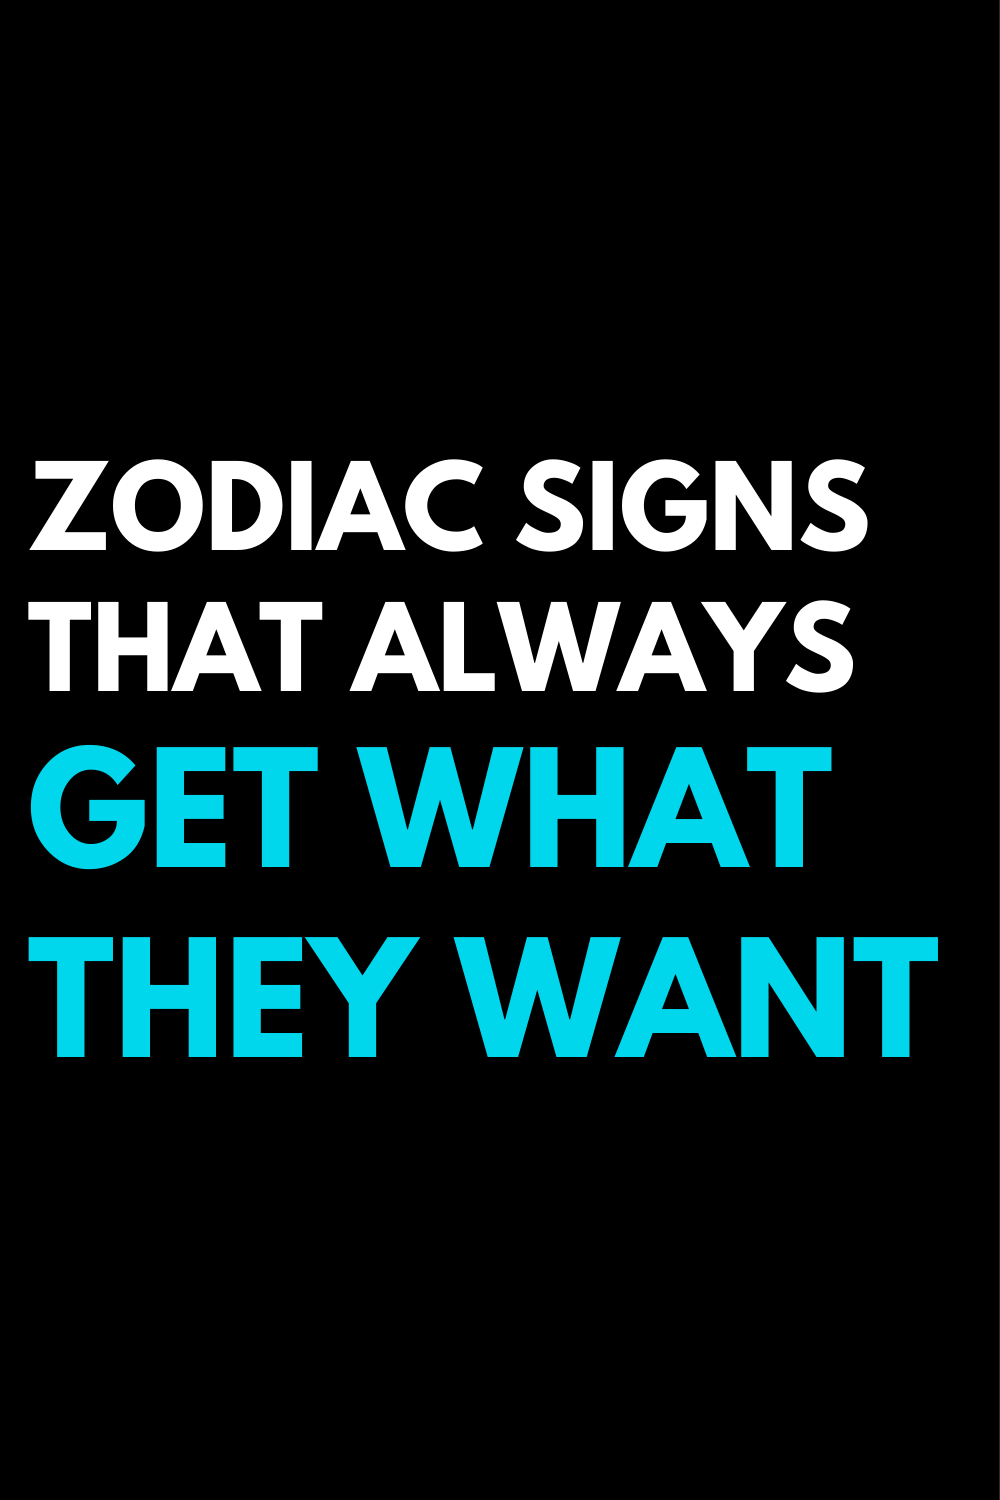 Zodiac signs that always get what they want